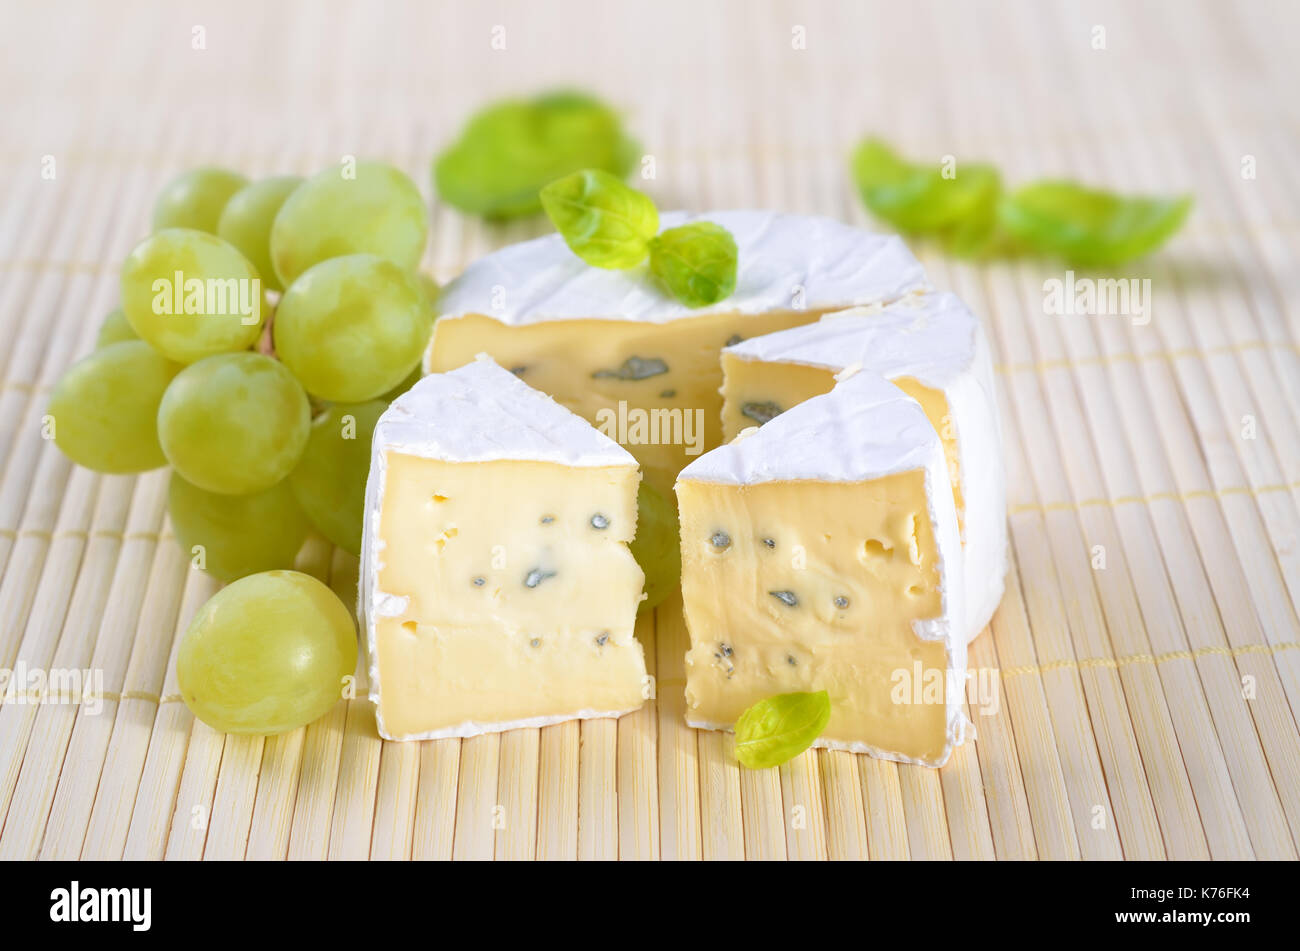 French Camembert soft cheese with grapes and marjorjam on an wooden placemat Stock Photo